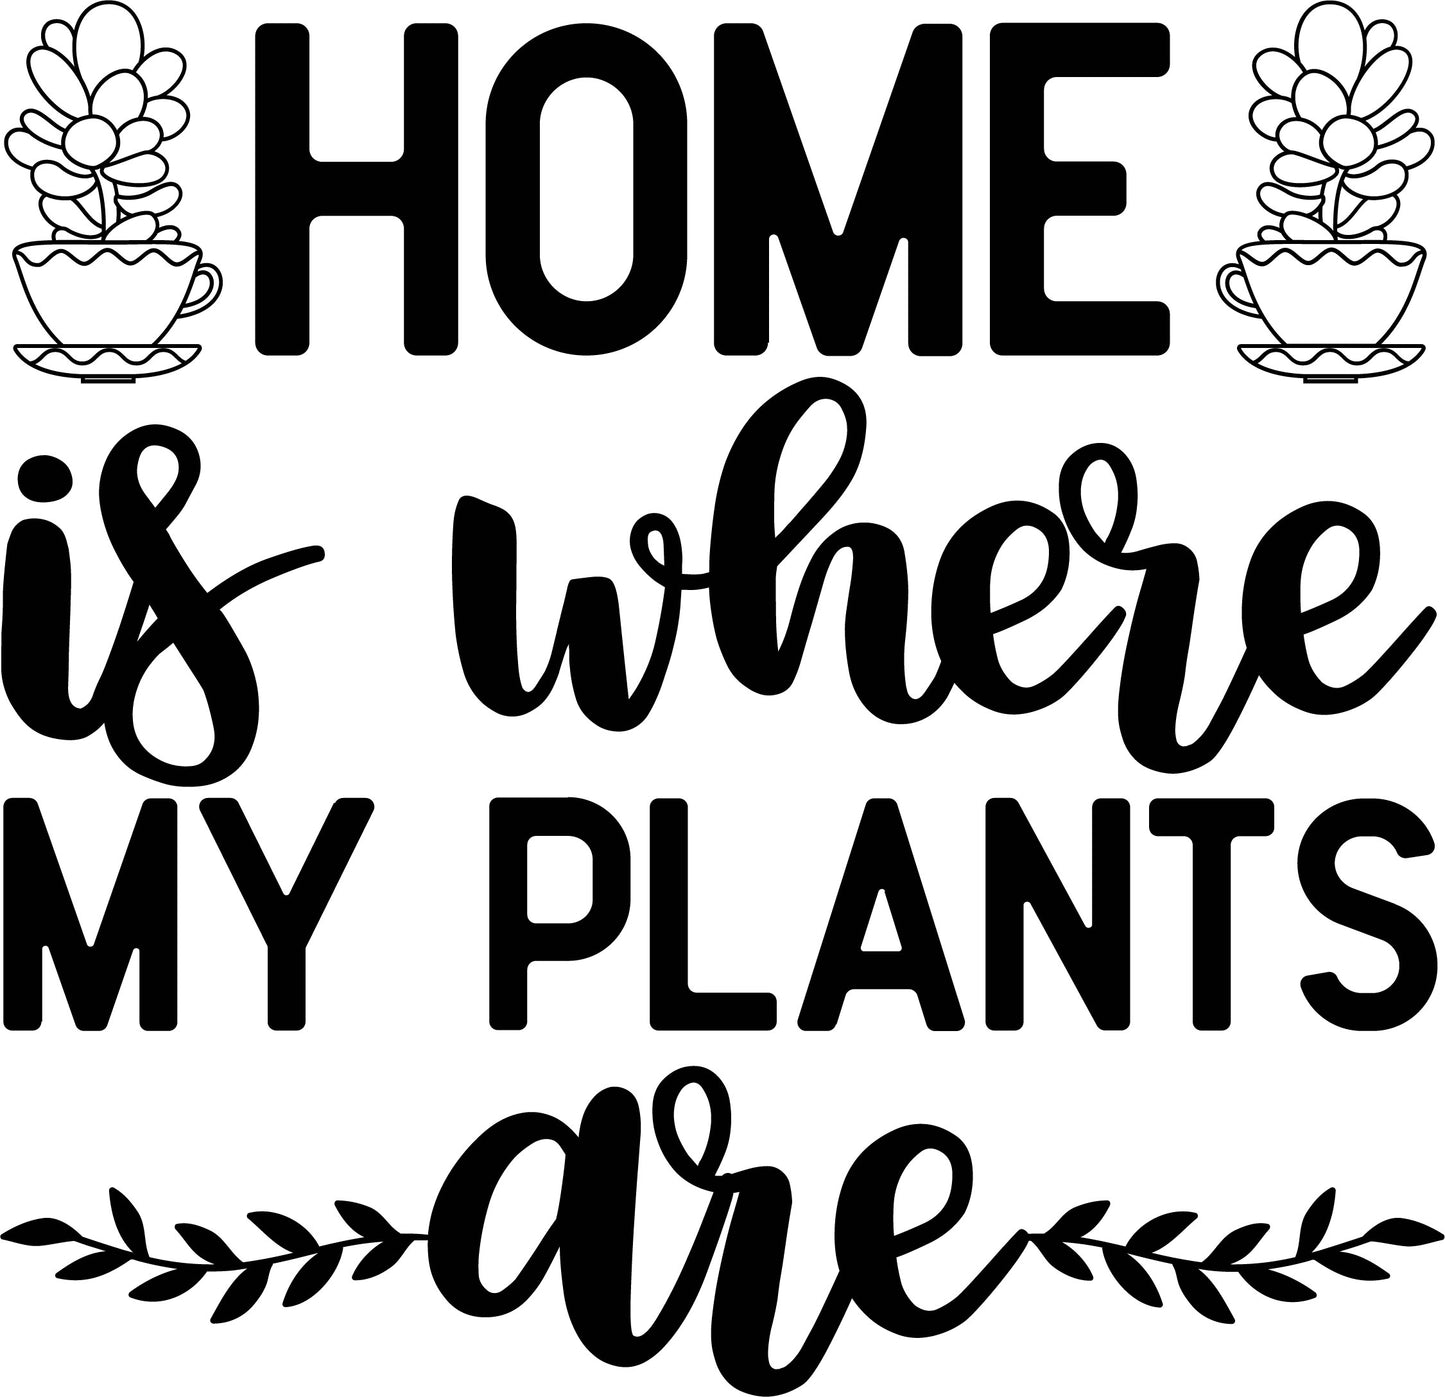 Home Is where My Plants Are Crew neck T-Shirt